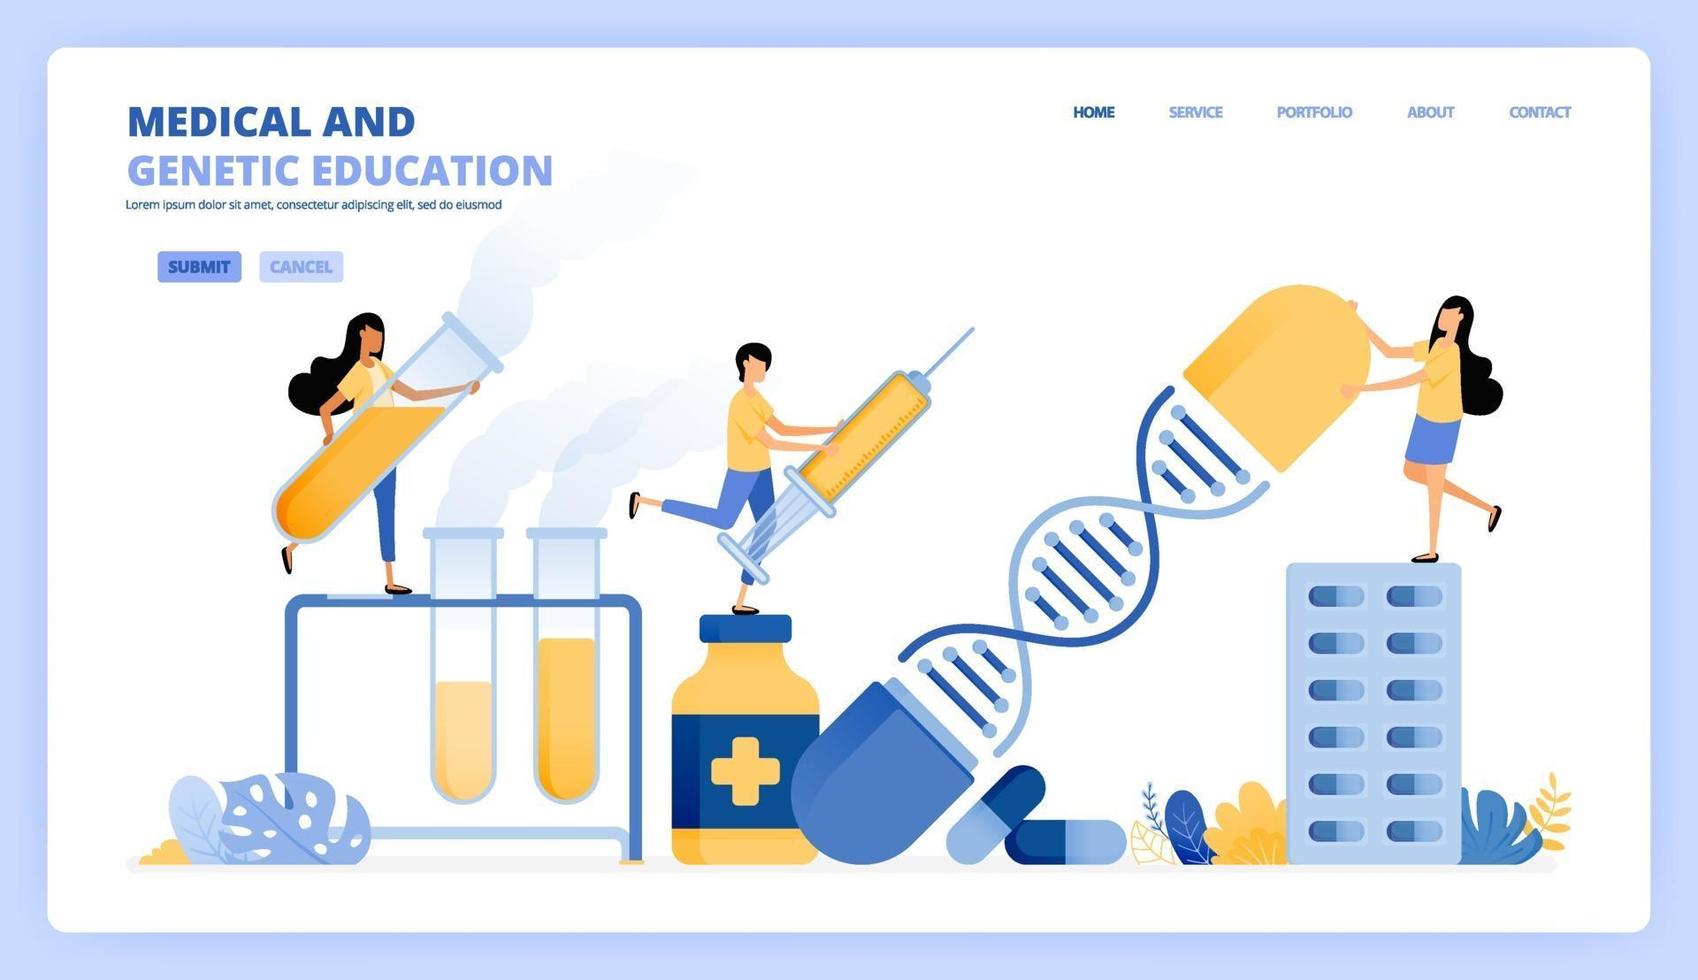 Learning illustrations for modern genetics chemistry and health. People research drugs, dna, medical support. Can be use for landing page template ui ux web mobile app poster banner website flyer ads vector